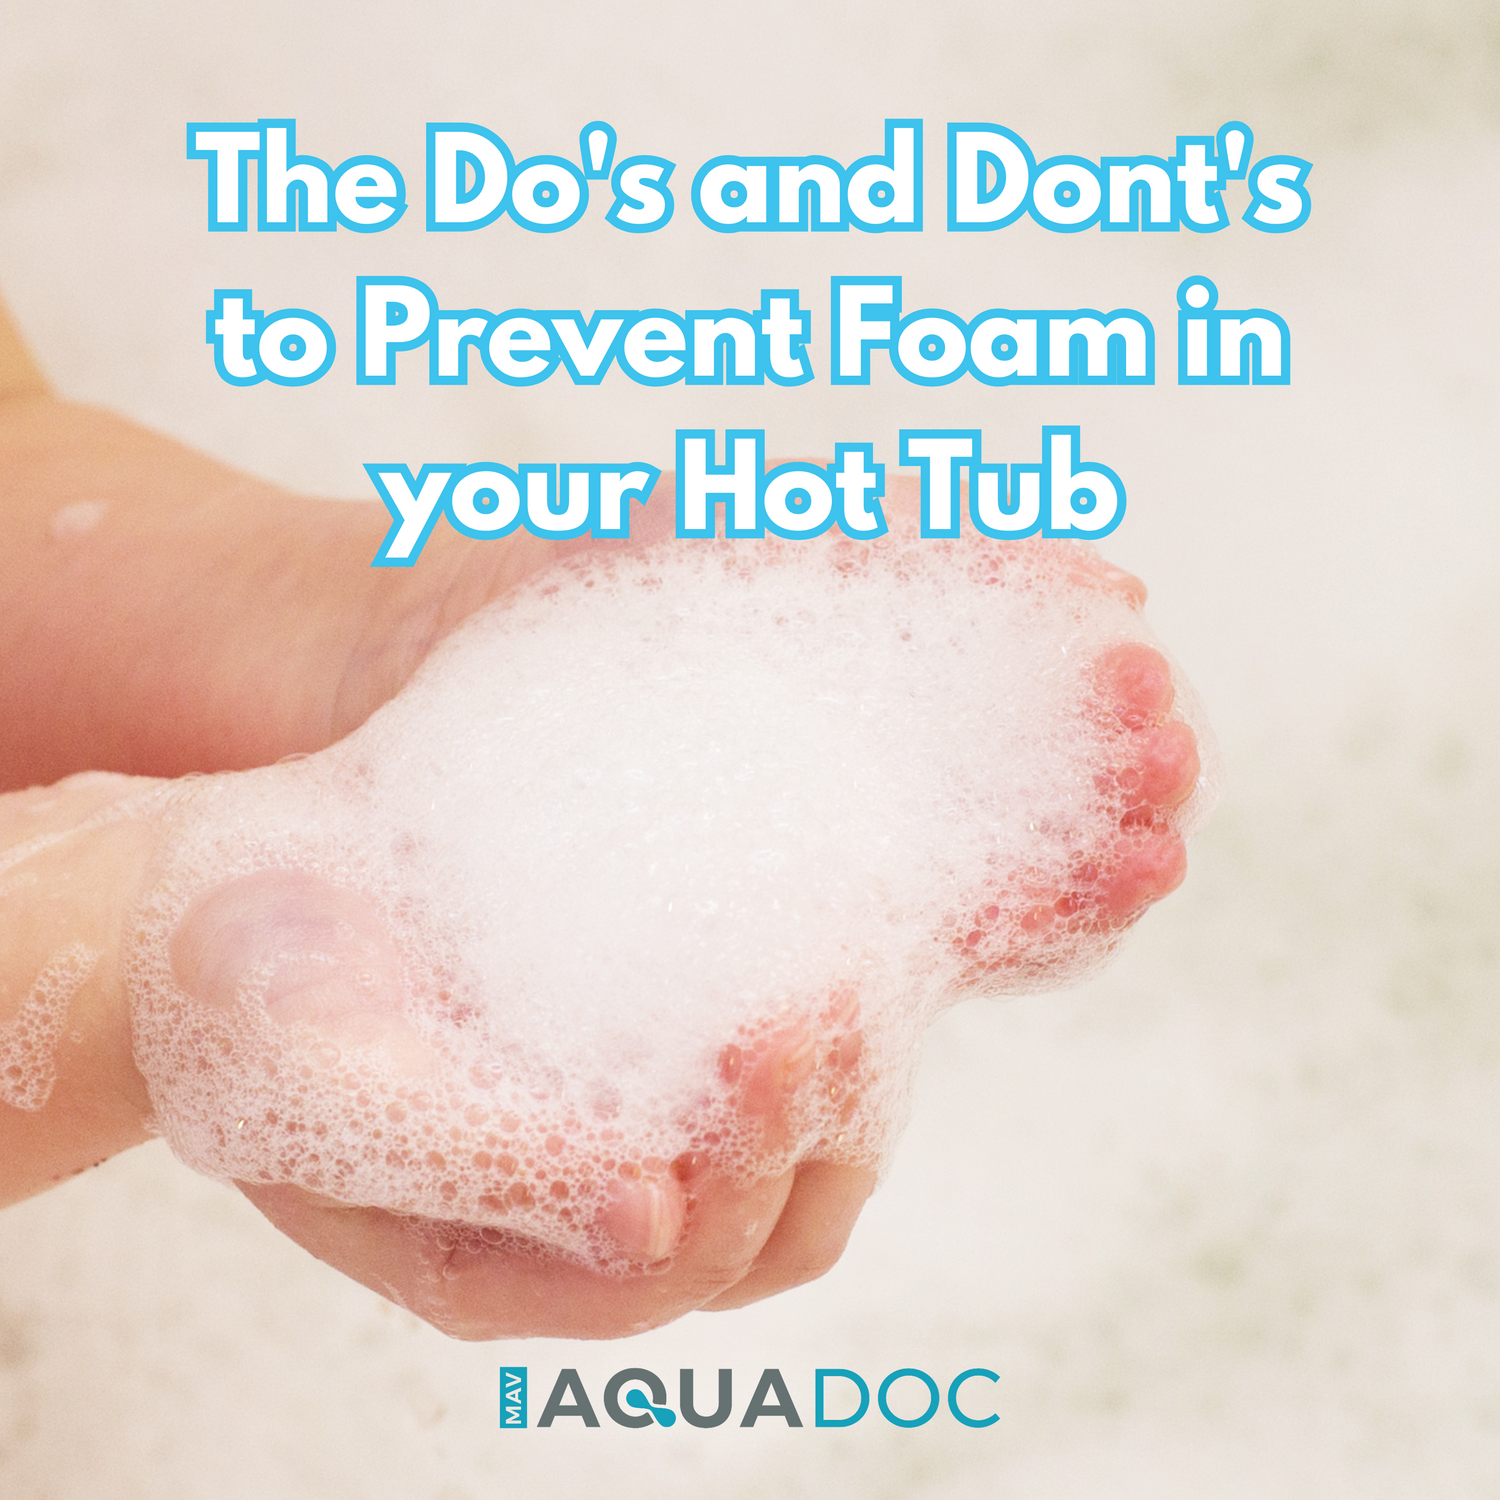 We've got the secret sauce to prevent foam in your hot tub and your serenity intact.